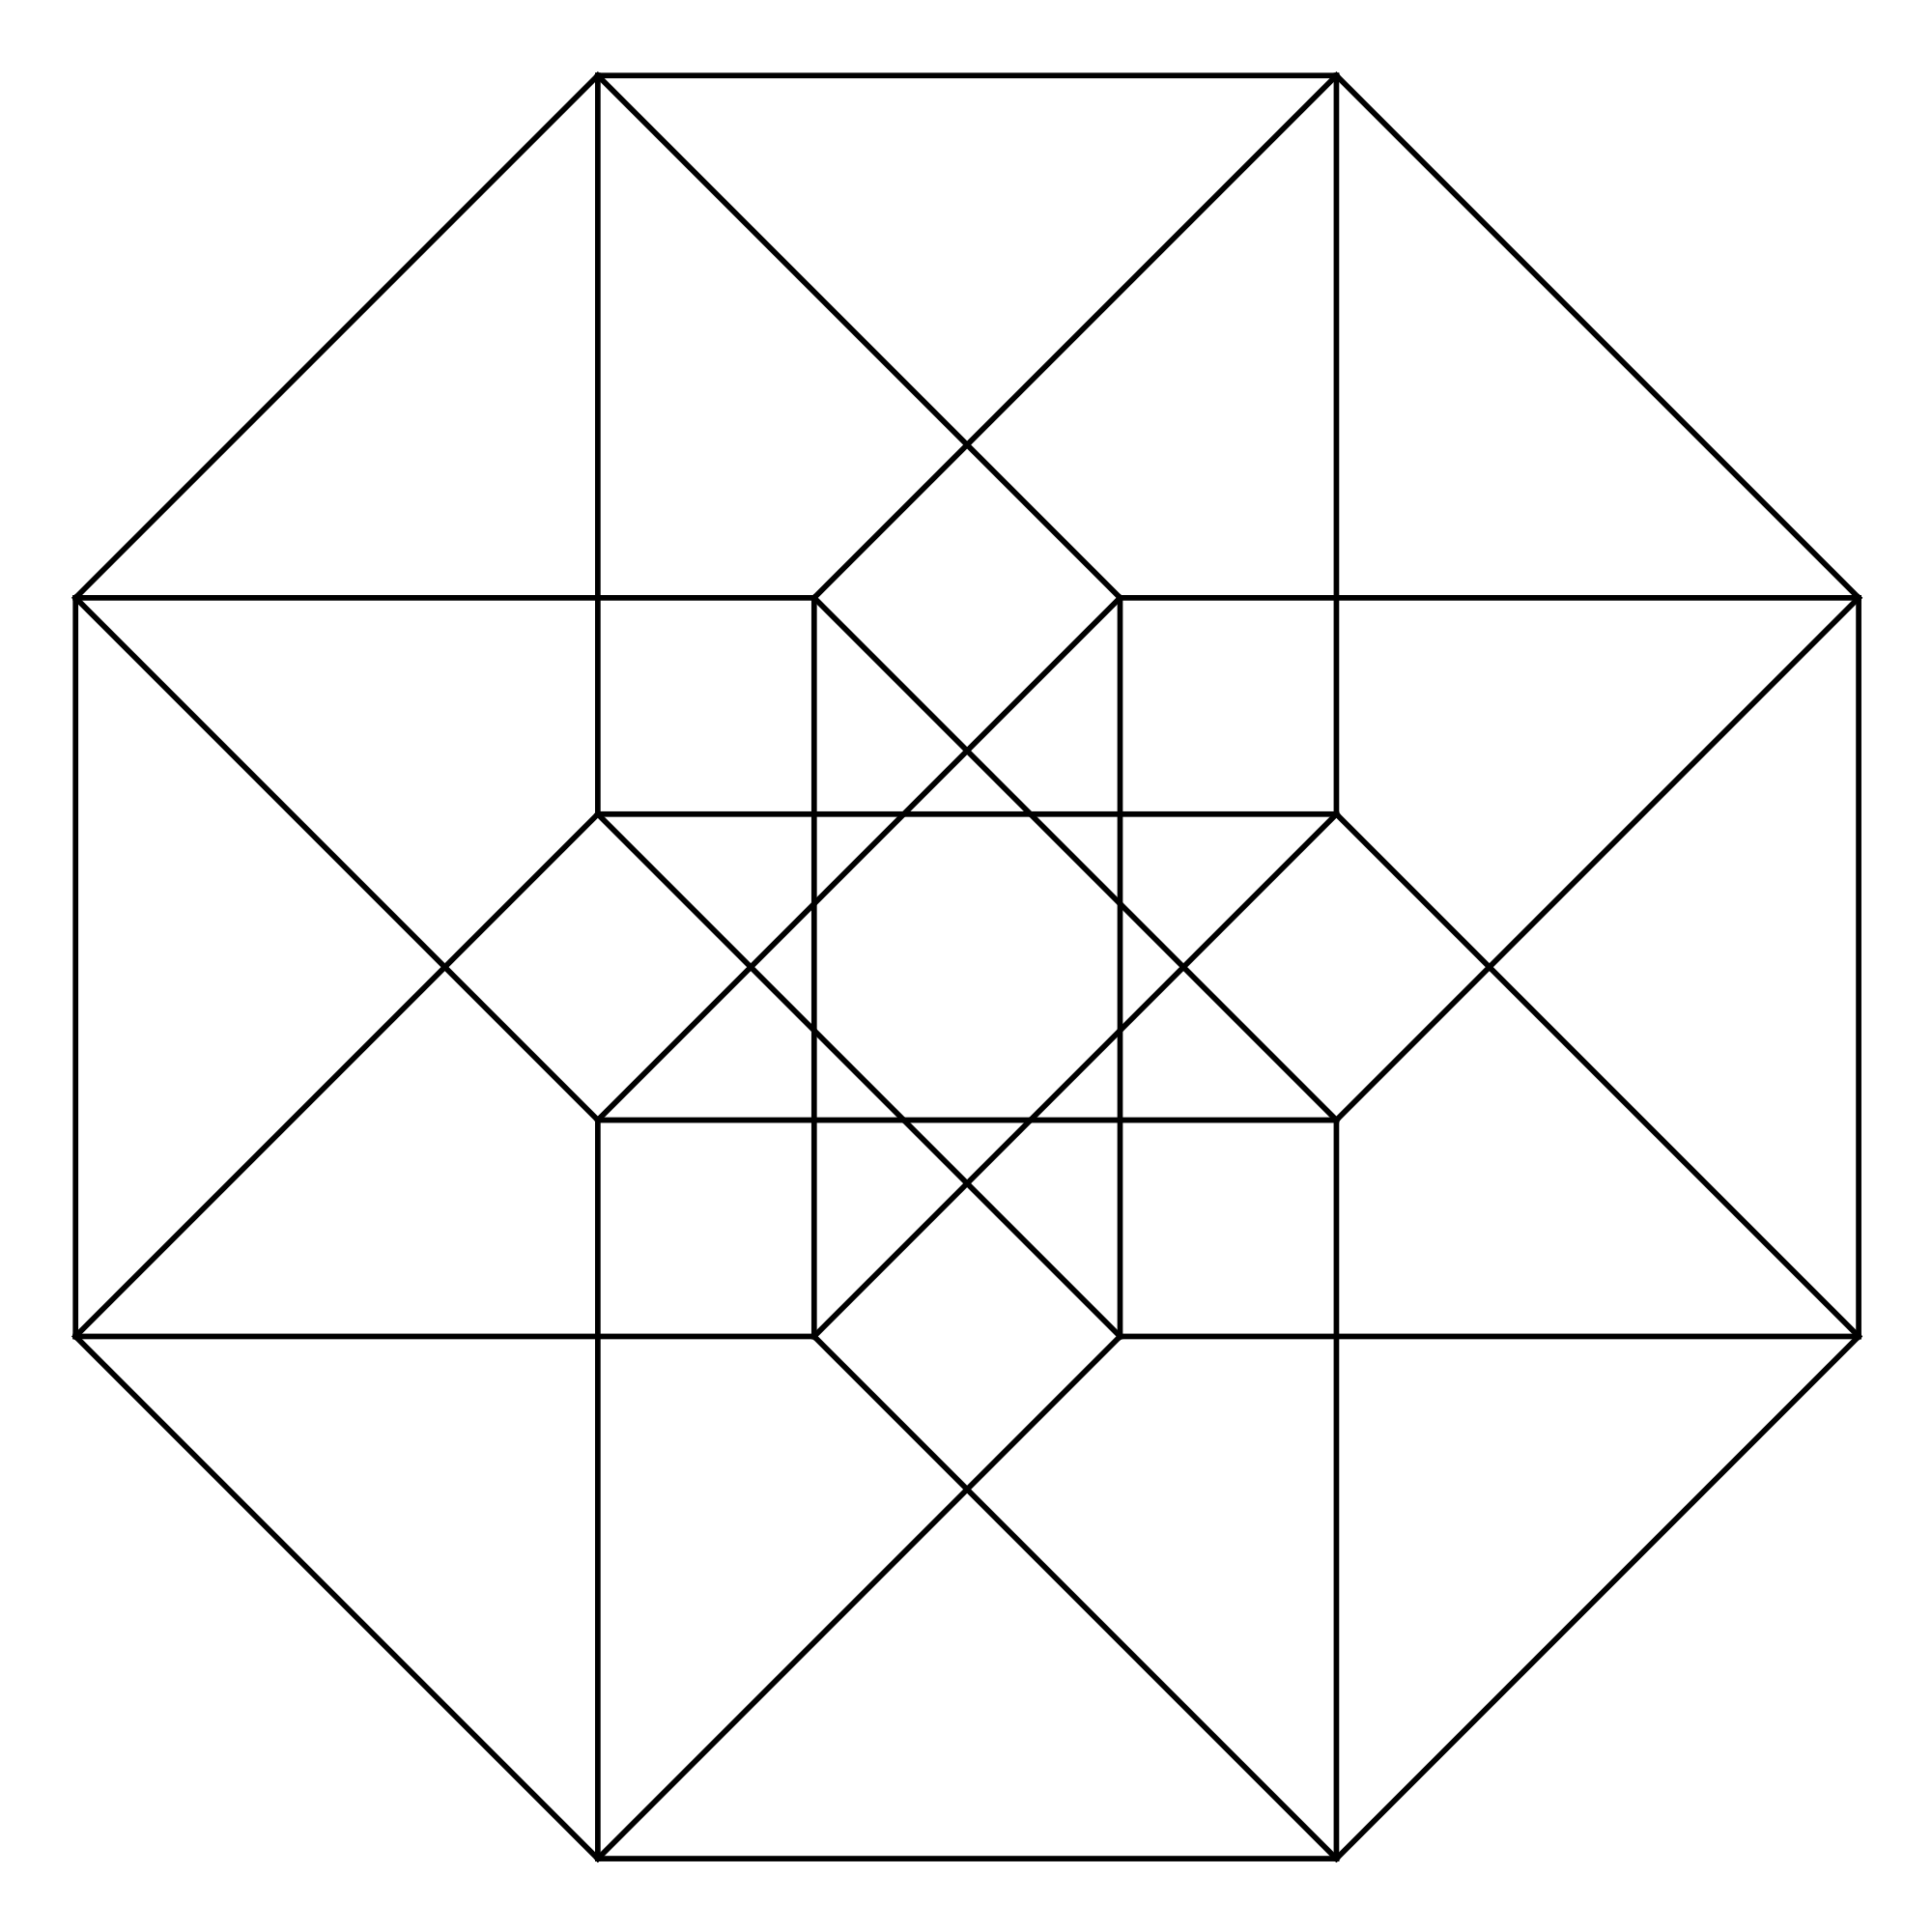 2000px-Tesseract_no_vertices.svg.png